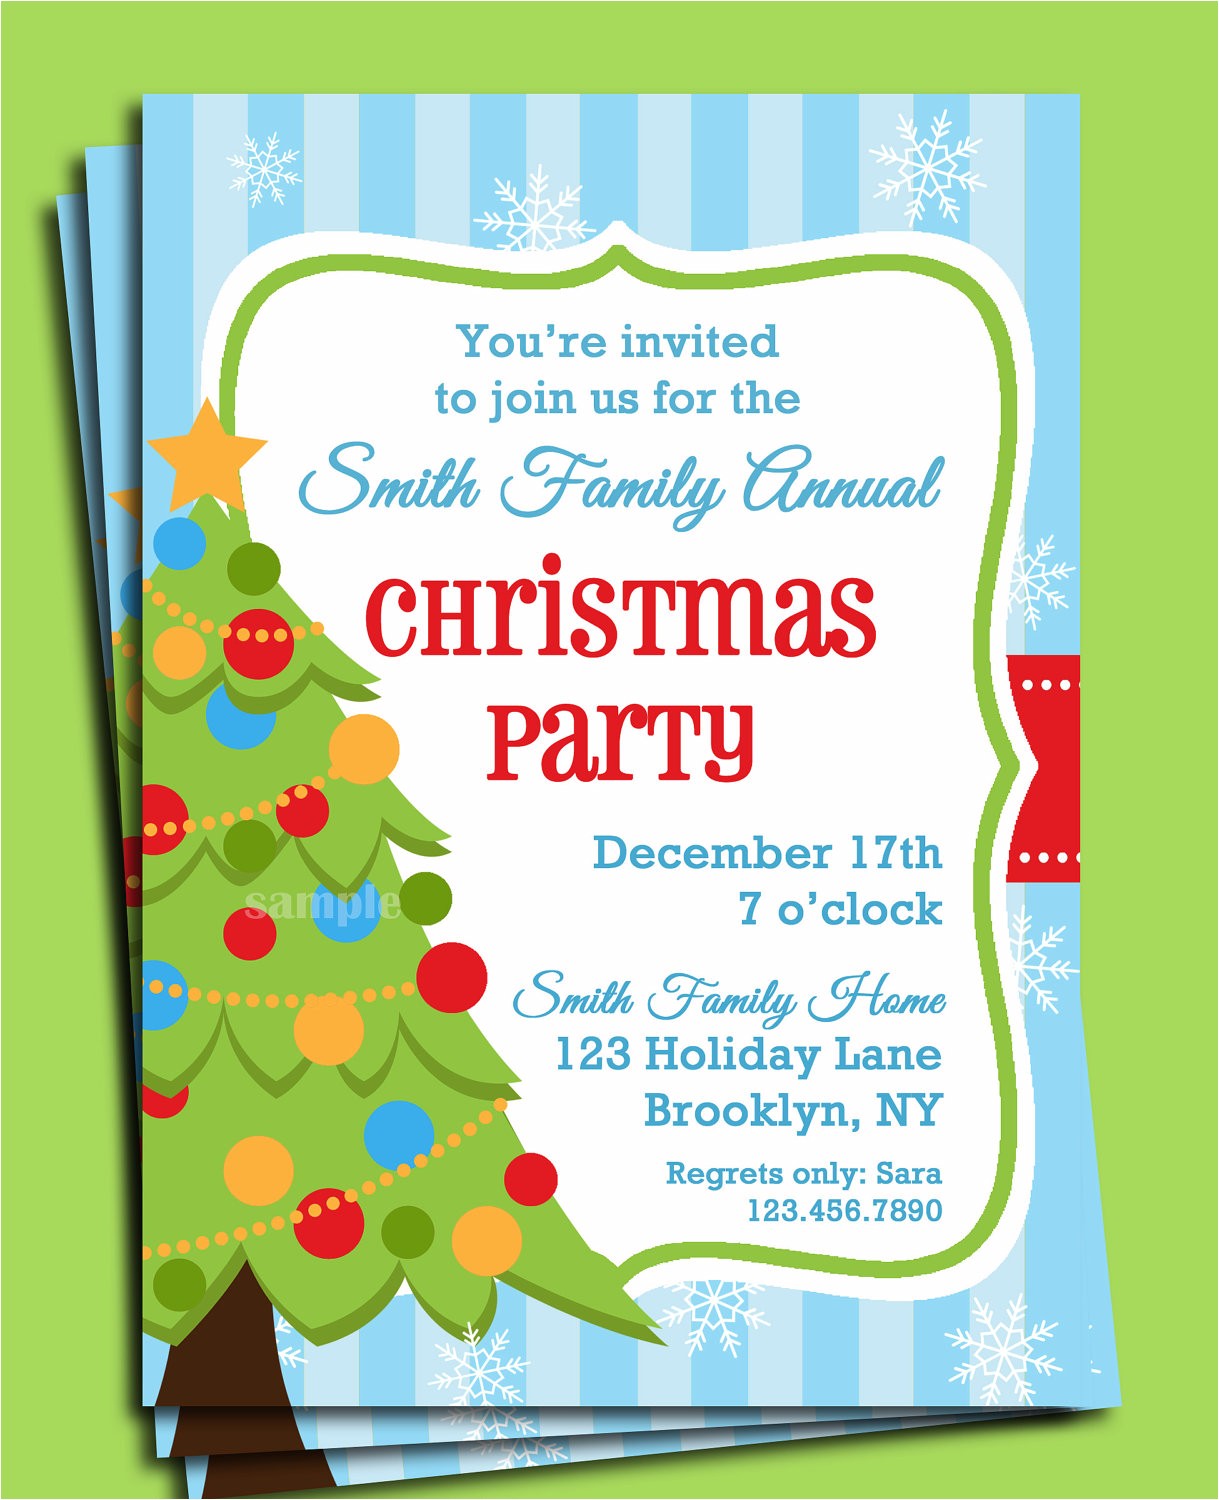 corporate holiday party invitation wording